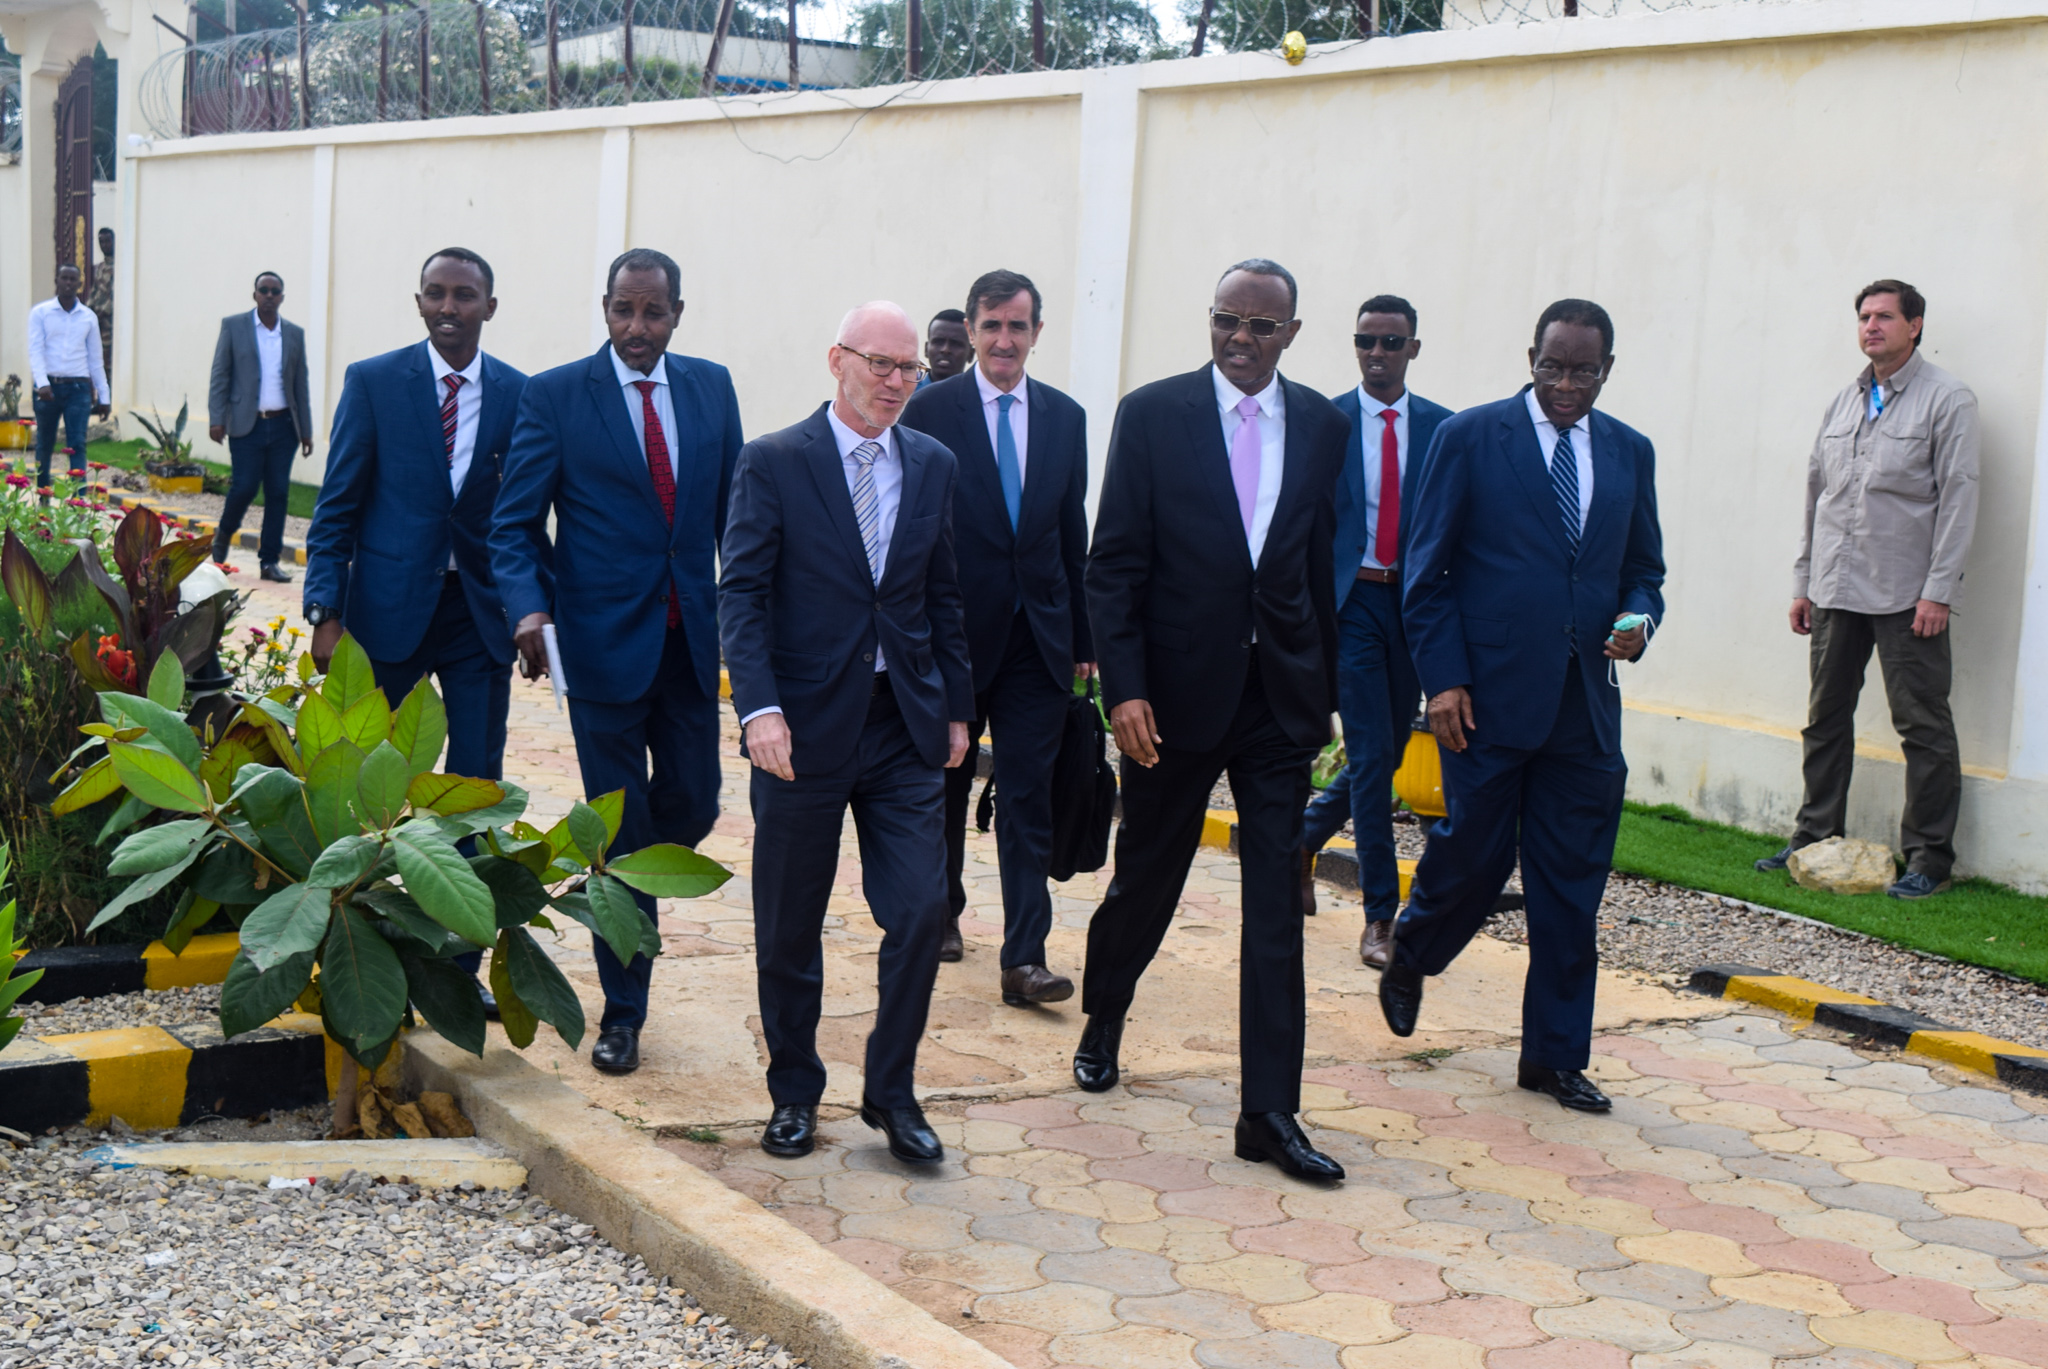 On Baidoa visit, International Representatives discuss elections, security and economic issues. 14 October 2020. Photo: UNSOM